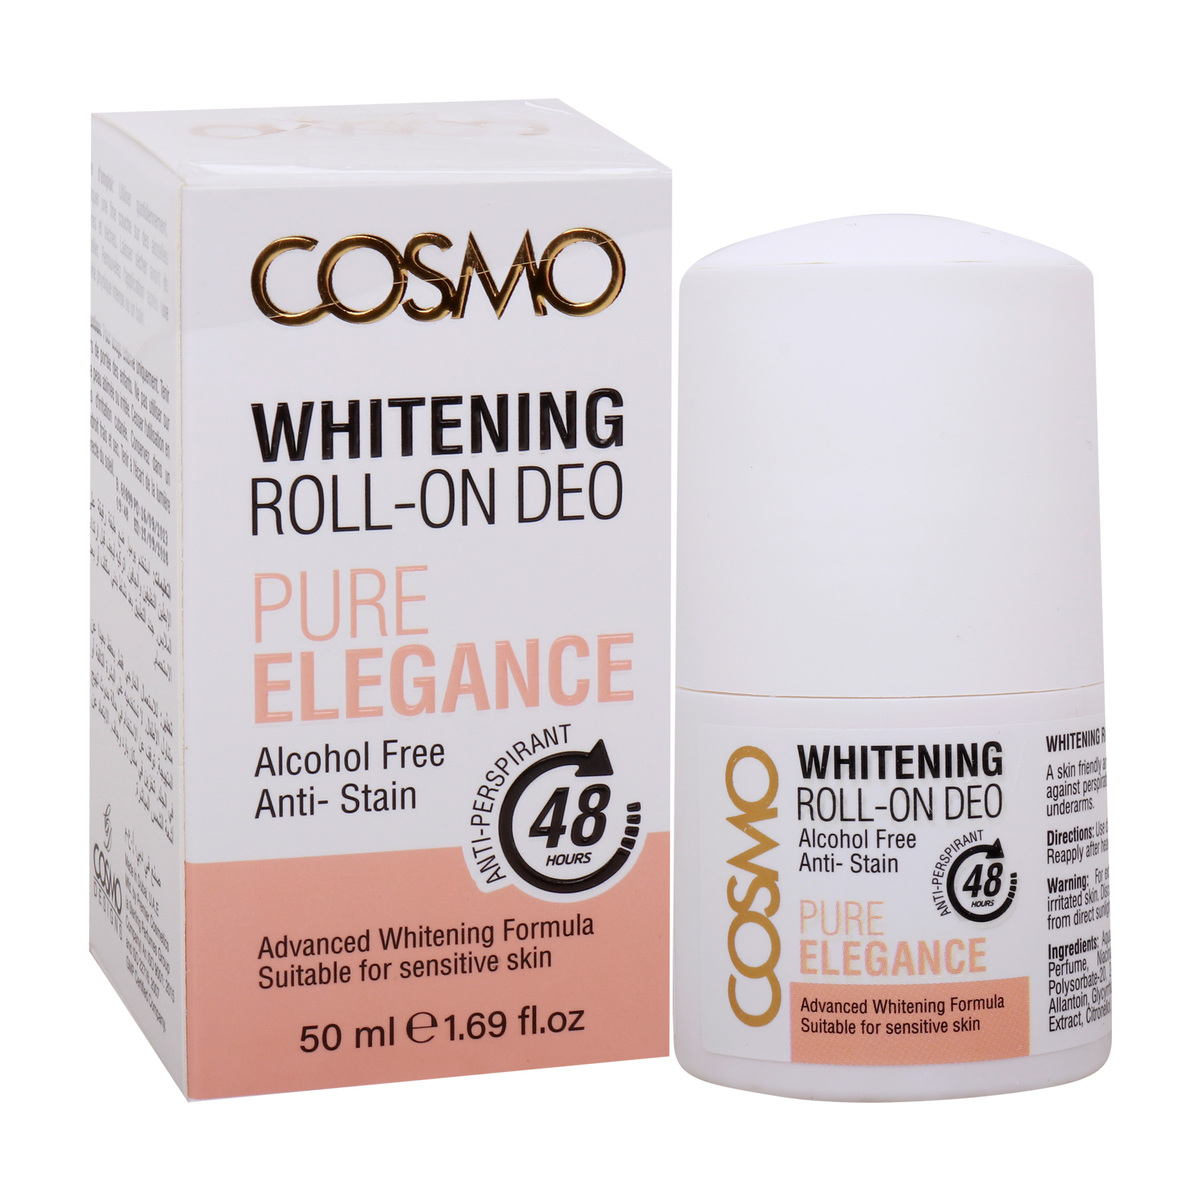 Cosmo Whitening Roll-On Deo Pure Elegance 50 ml